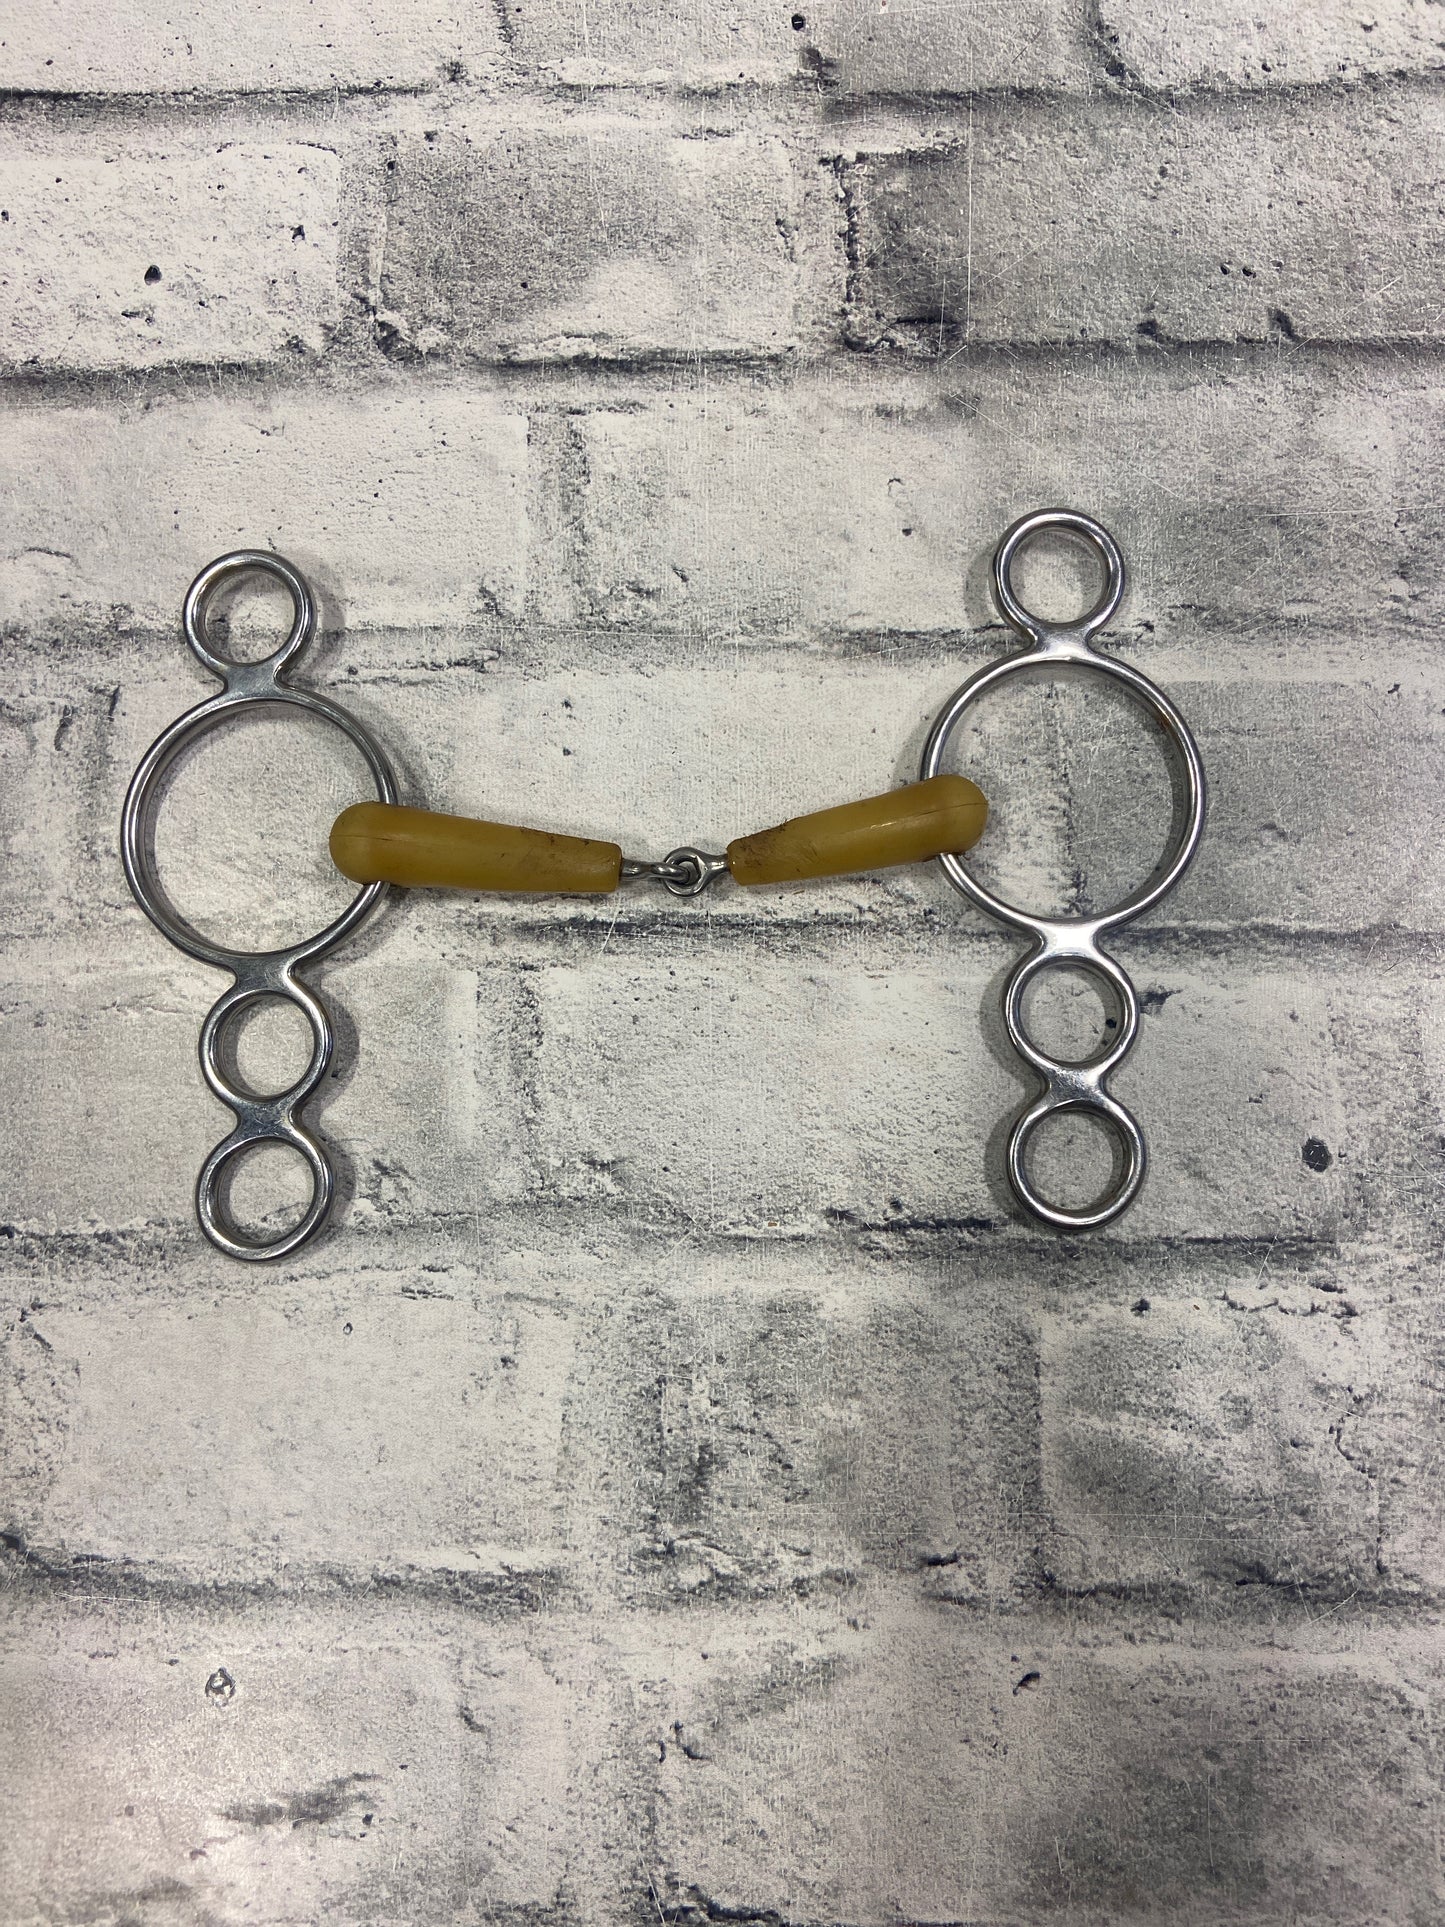 5.5" Happy Mouth Jointed 3-Ring Gag Bit